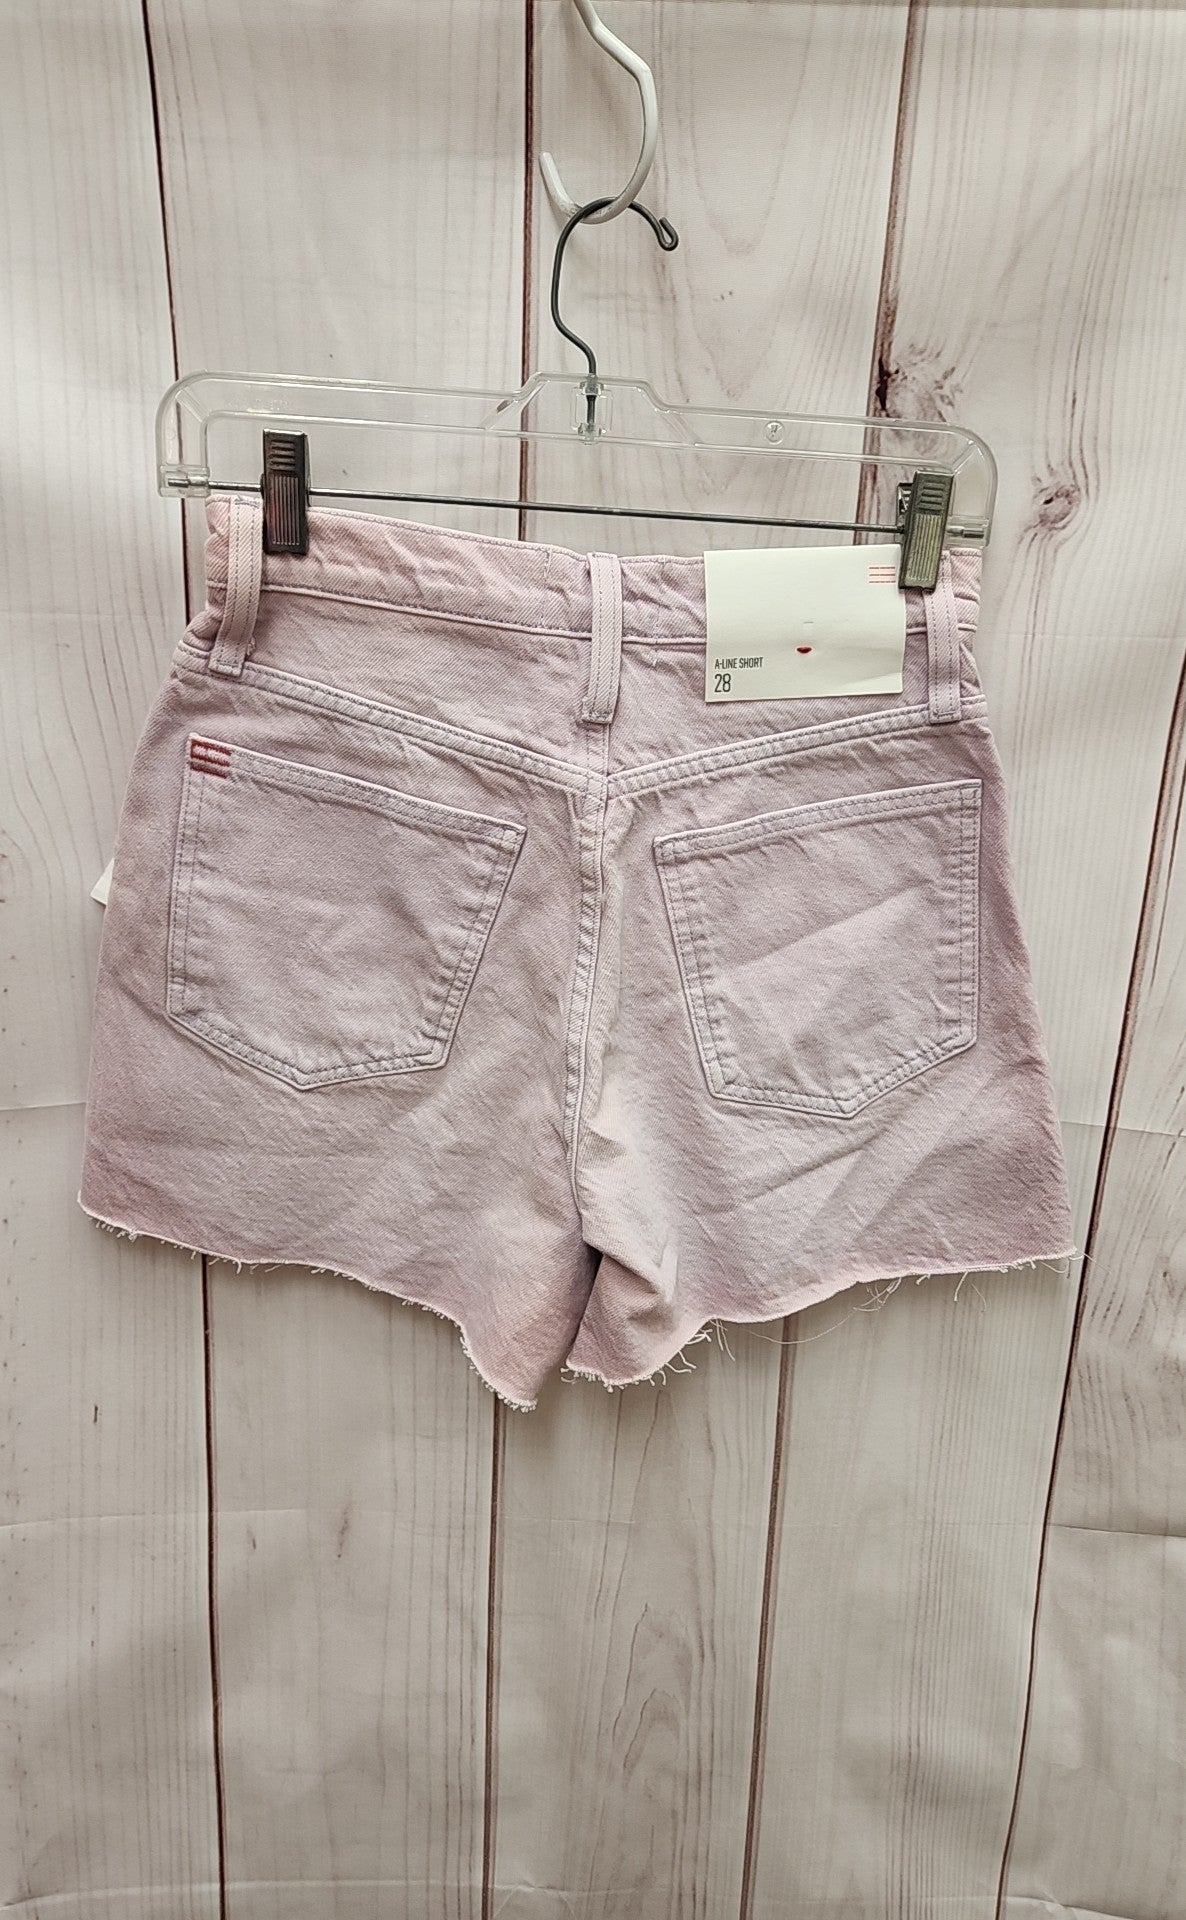 Bdg Women's Size 28 (5-6) A-Line Short Pink Shorts NWT